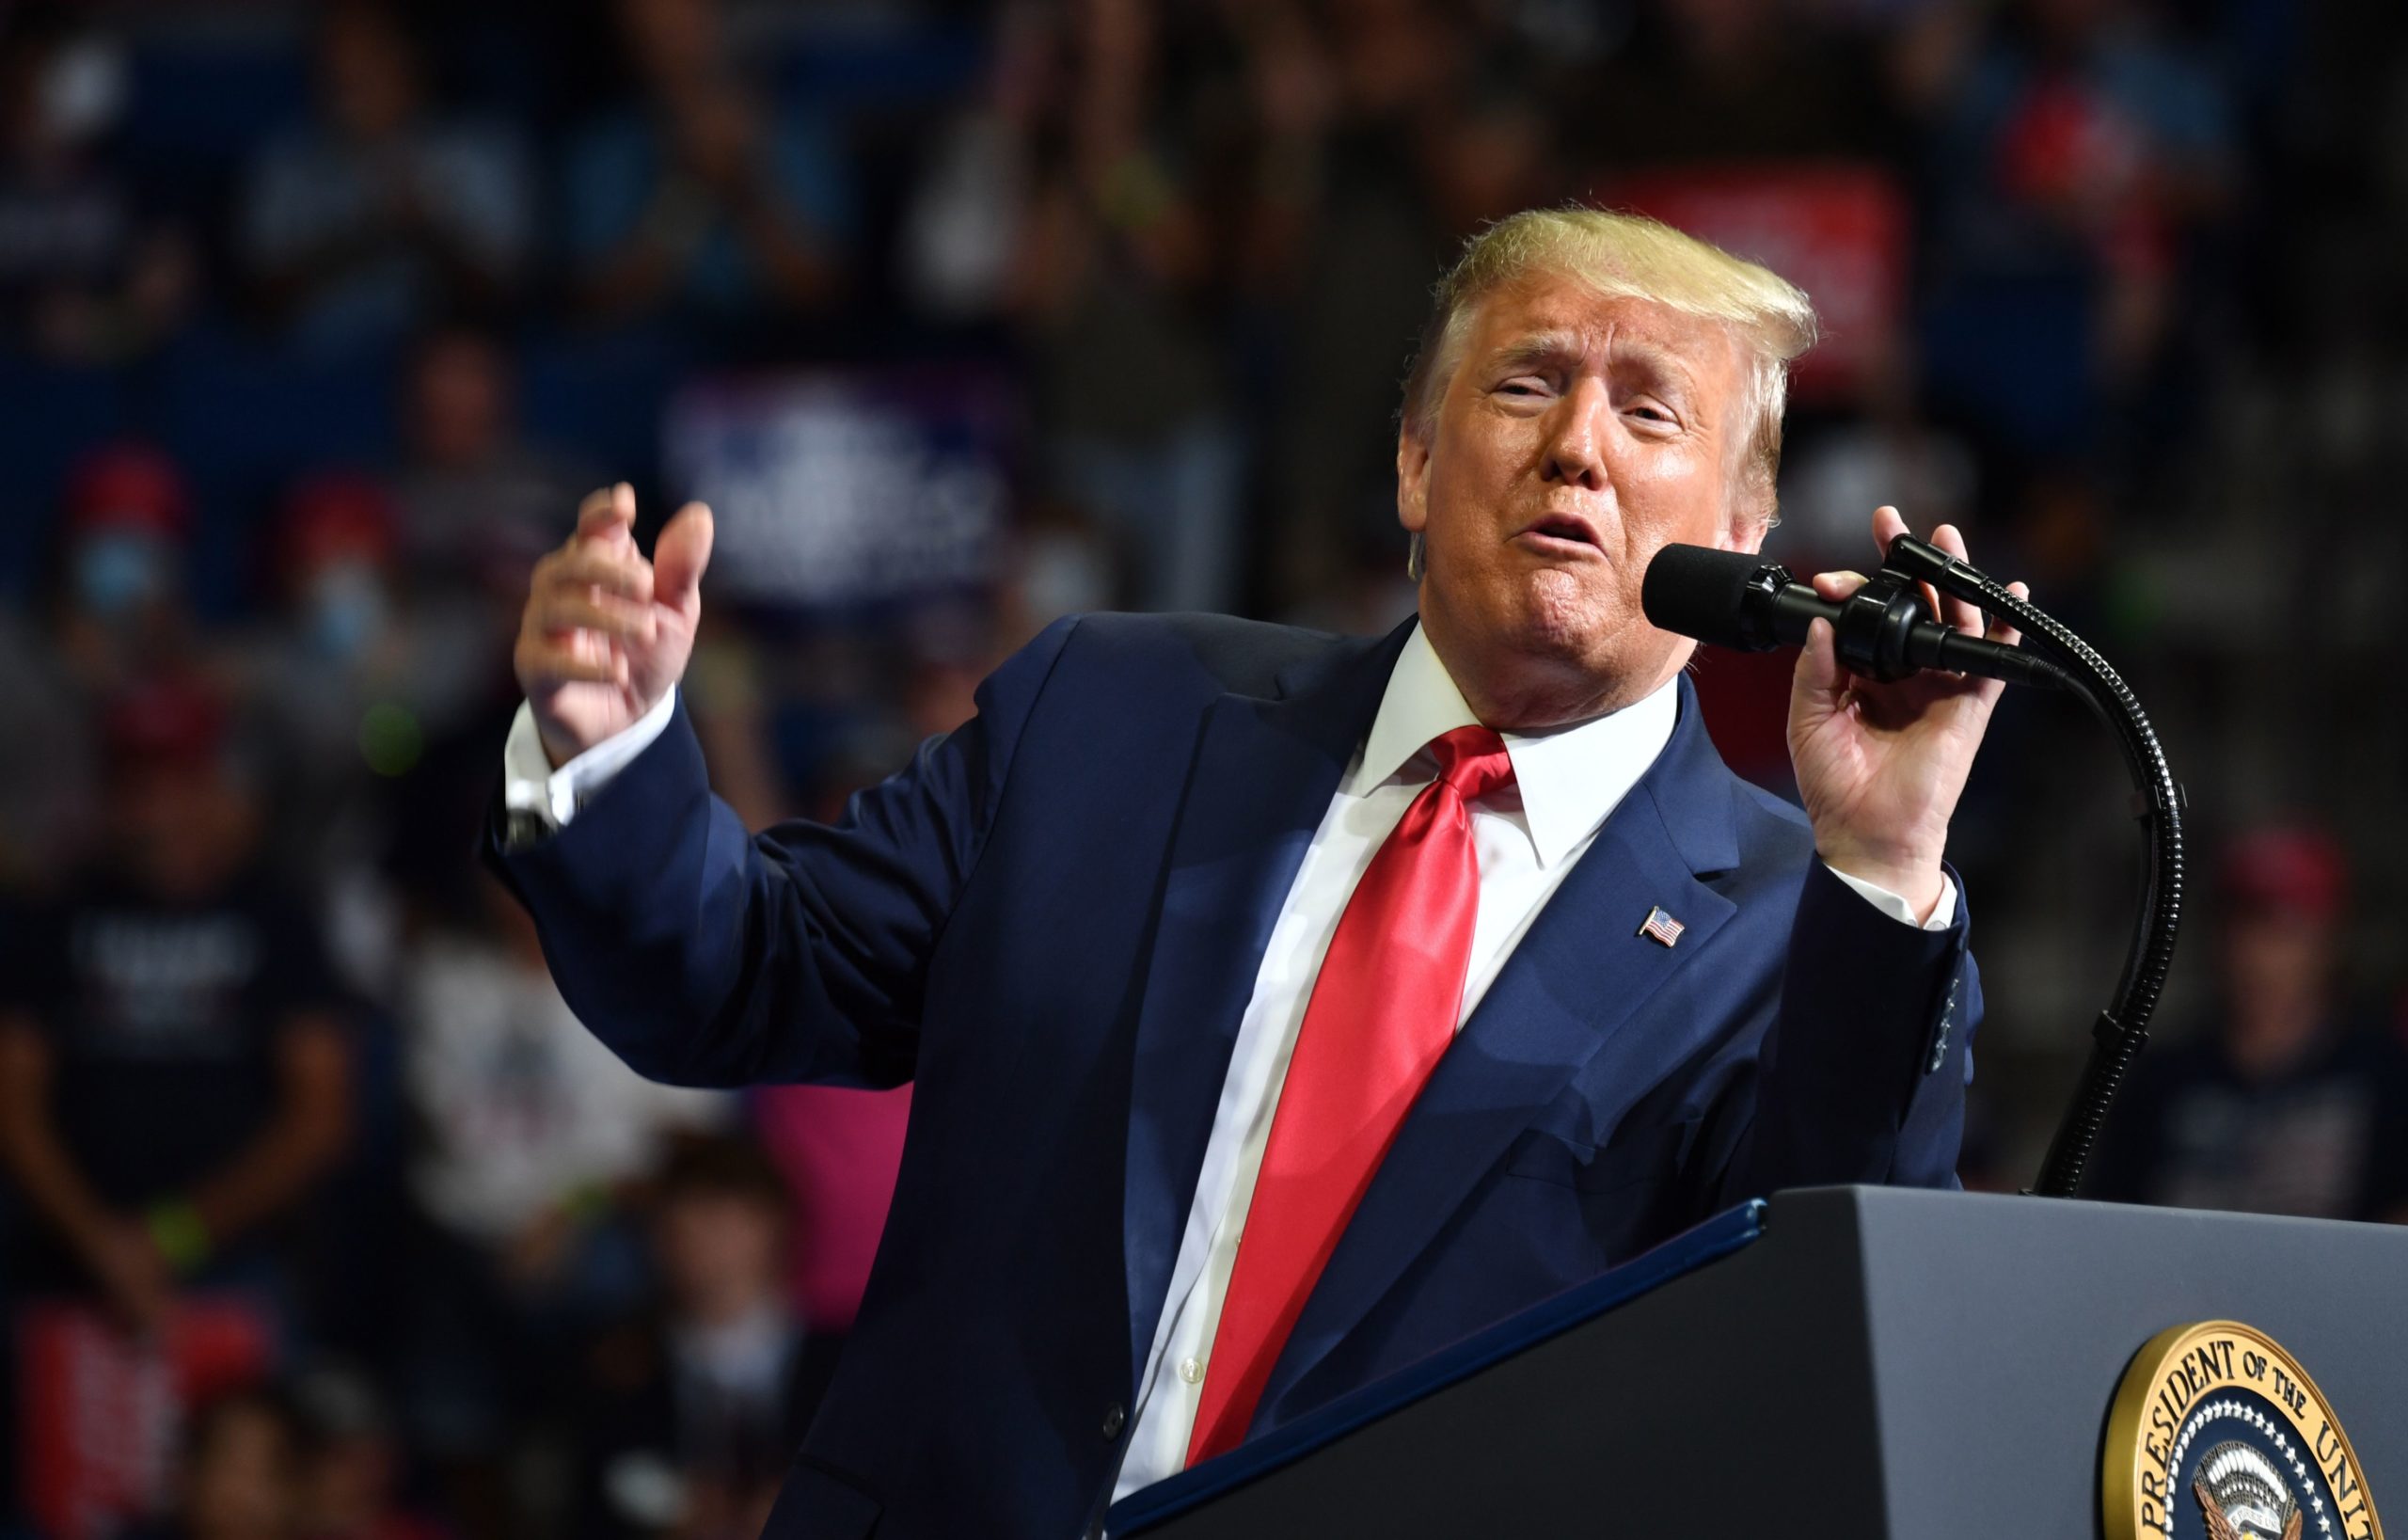 US President Donald Trump speaks during a campaign rally at the BOK Center on June 20, 2020 in Tulsa, Oklahoma.